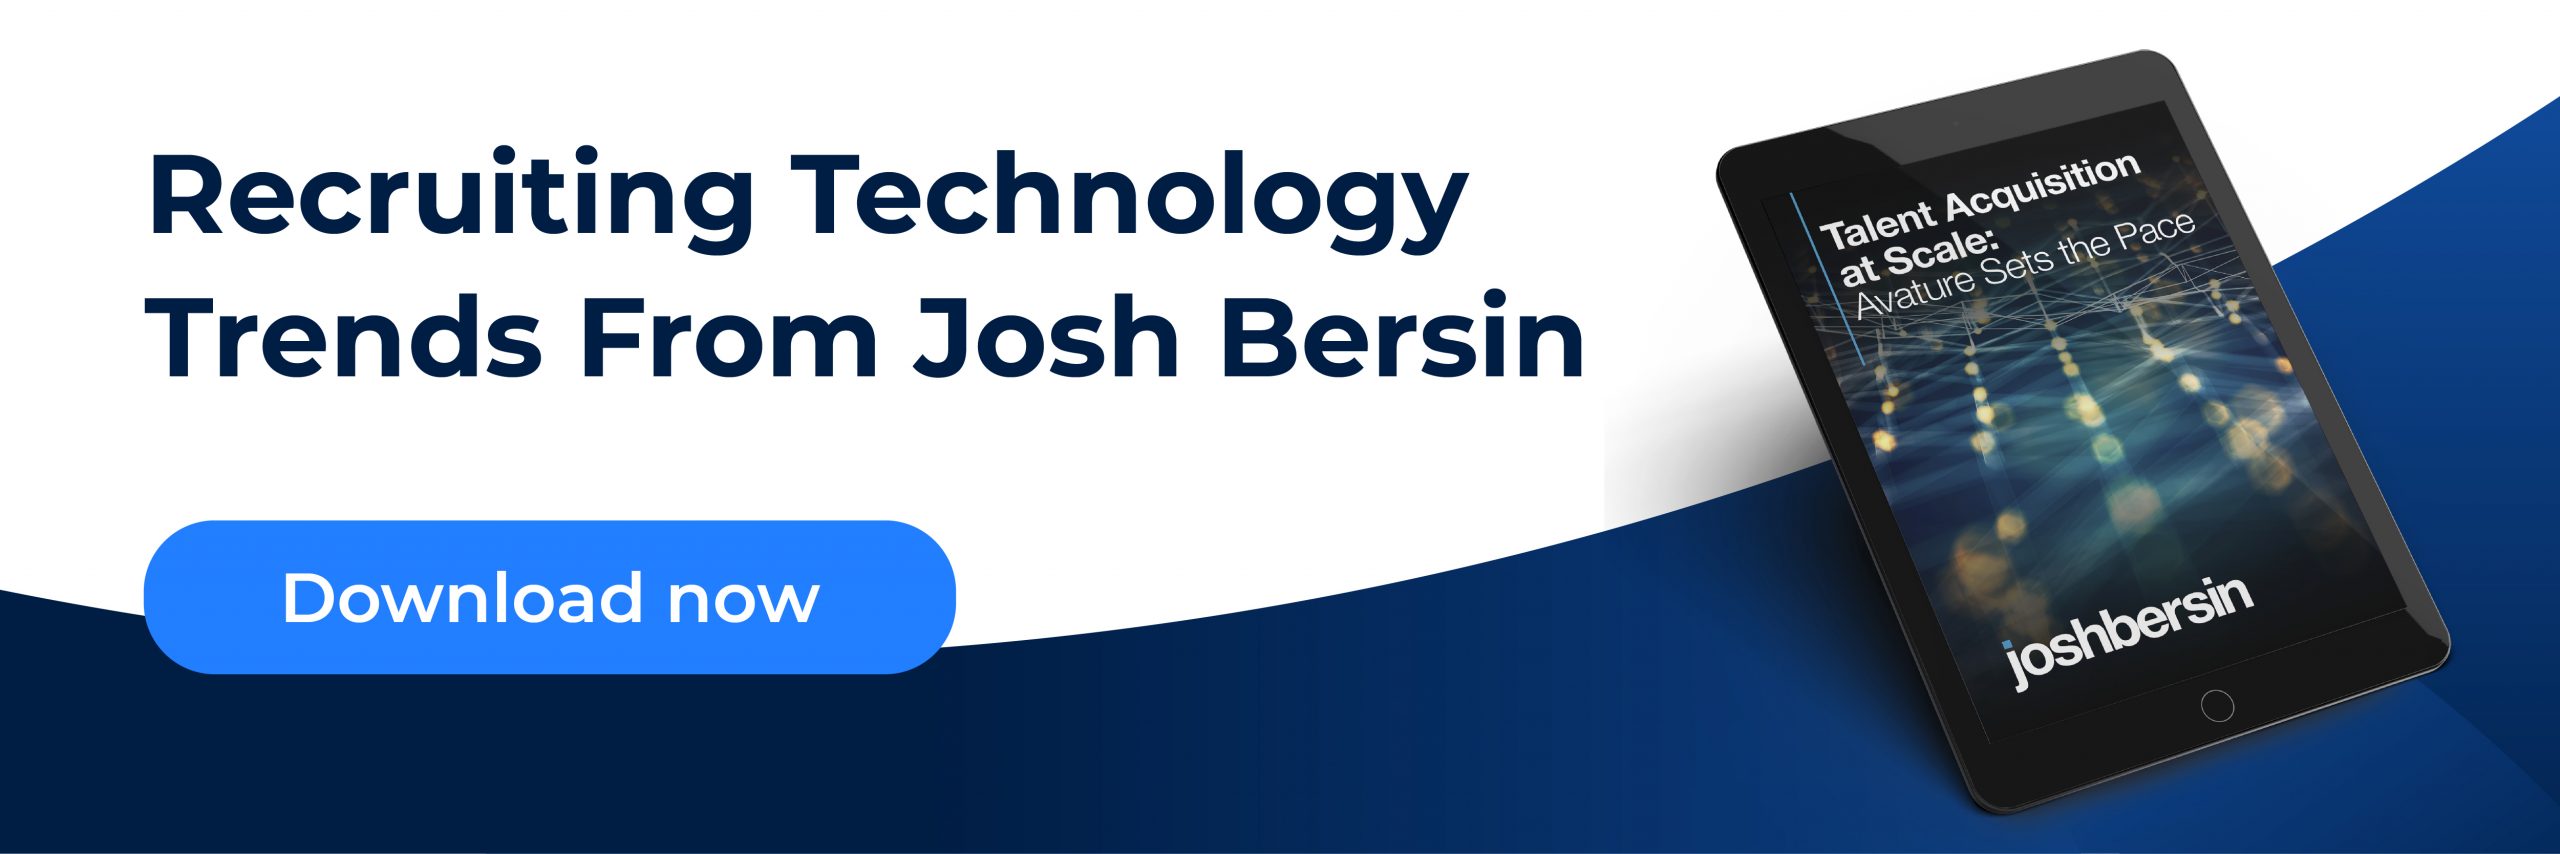 Banner promoting a report by Josh Bersin on recruiting technology trends and the direct link to access the report.